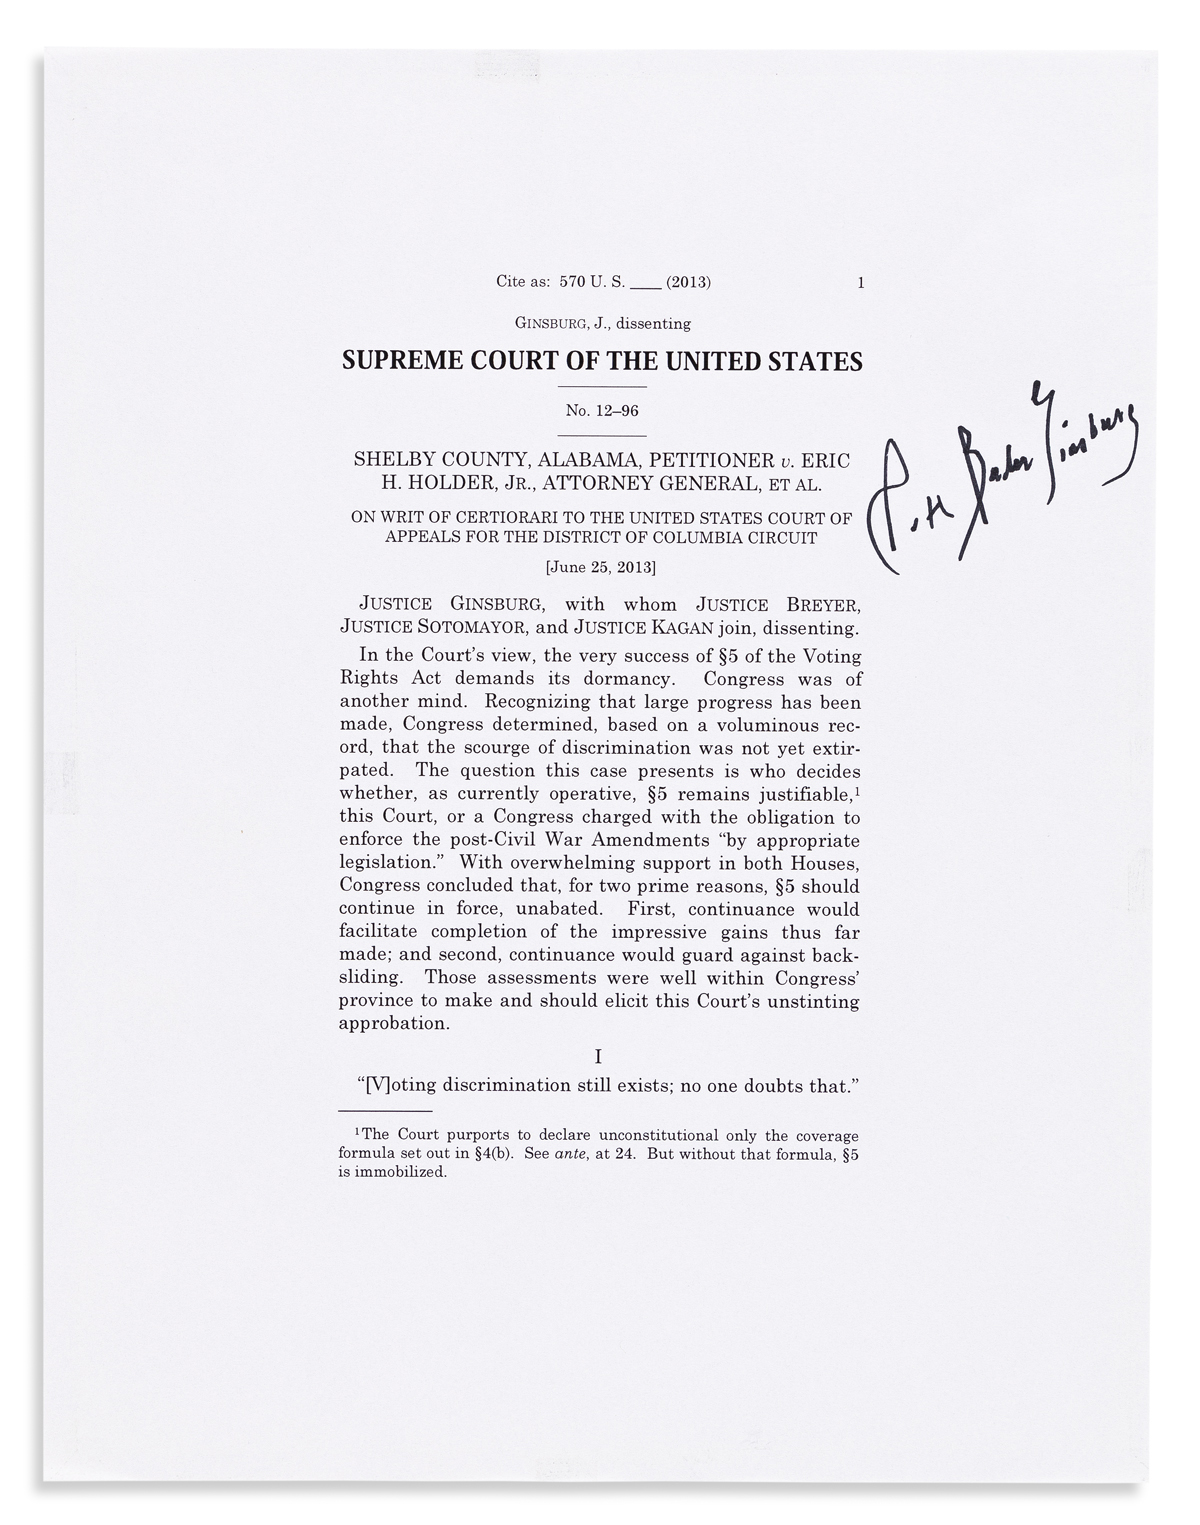 Ginsburg, Ruth Bader (1933-2020) Signed Dissenting Opinion Cover Sheet, Shelby County v. Eric H. Holder.